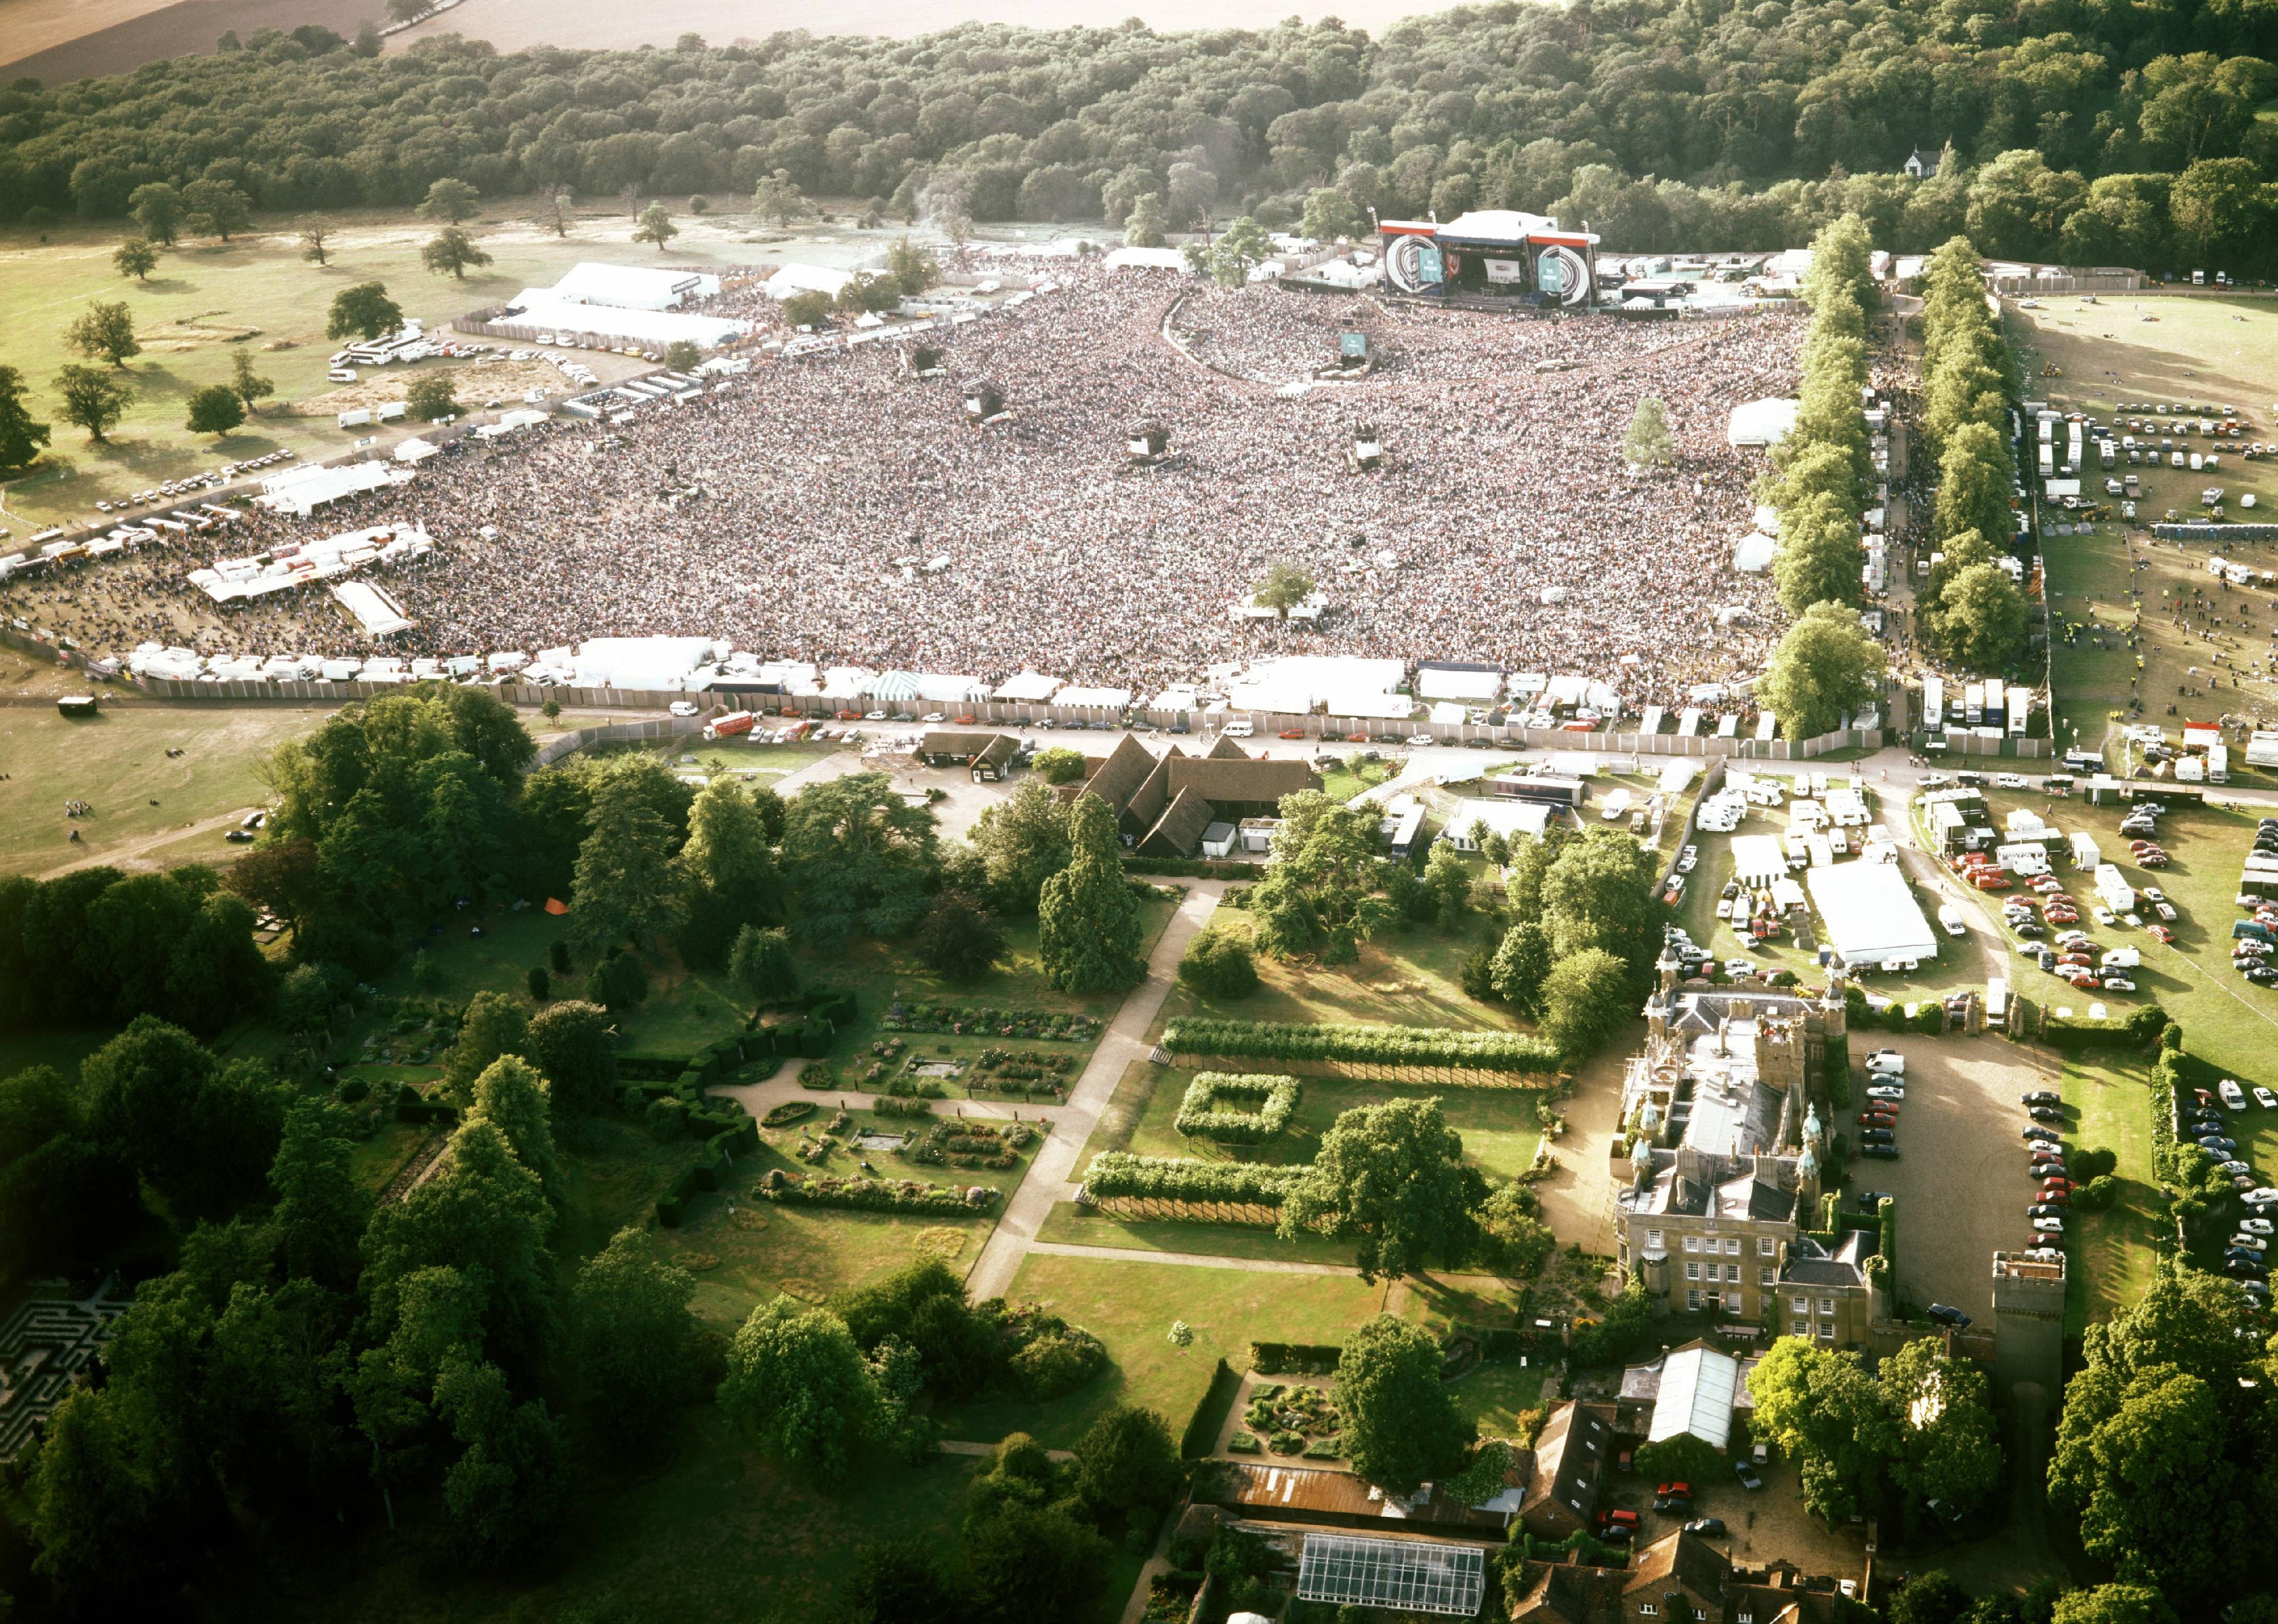 <p>Rock band Oasis was coming off the successful sophomore album "(What's The Story) Morning Glory?" when they headlined this outdoor music festival. They broke local attendance records by playing to an estimated 125,000 people per night over the course of two shows. Band member Noel Gallagher later said the years that <a href="https://www.radiox.co.uk/artists/oasis/10-facts-about-oasis-at-knebworth-1996/">followed were like a "comedown"</a> from this event.</p>